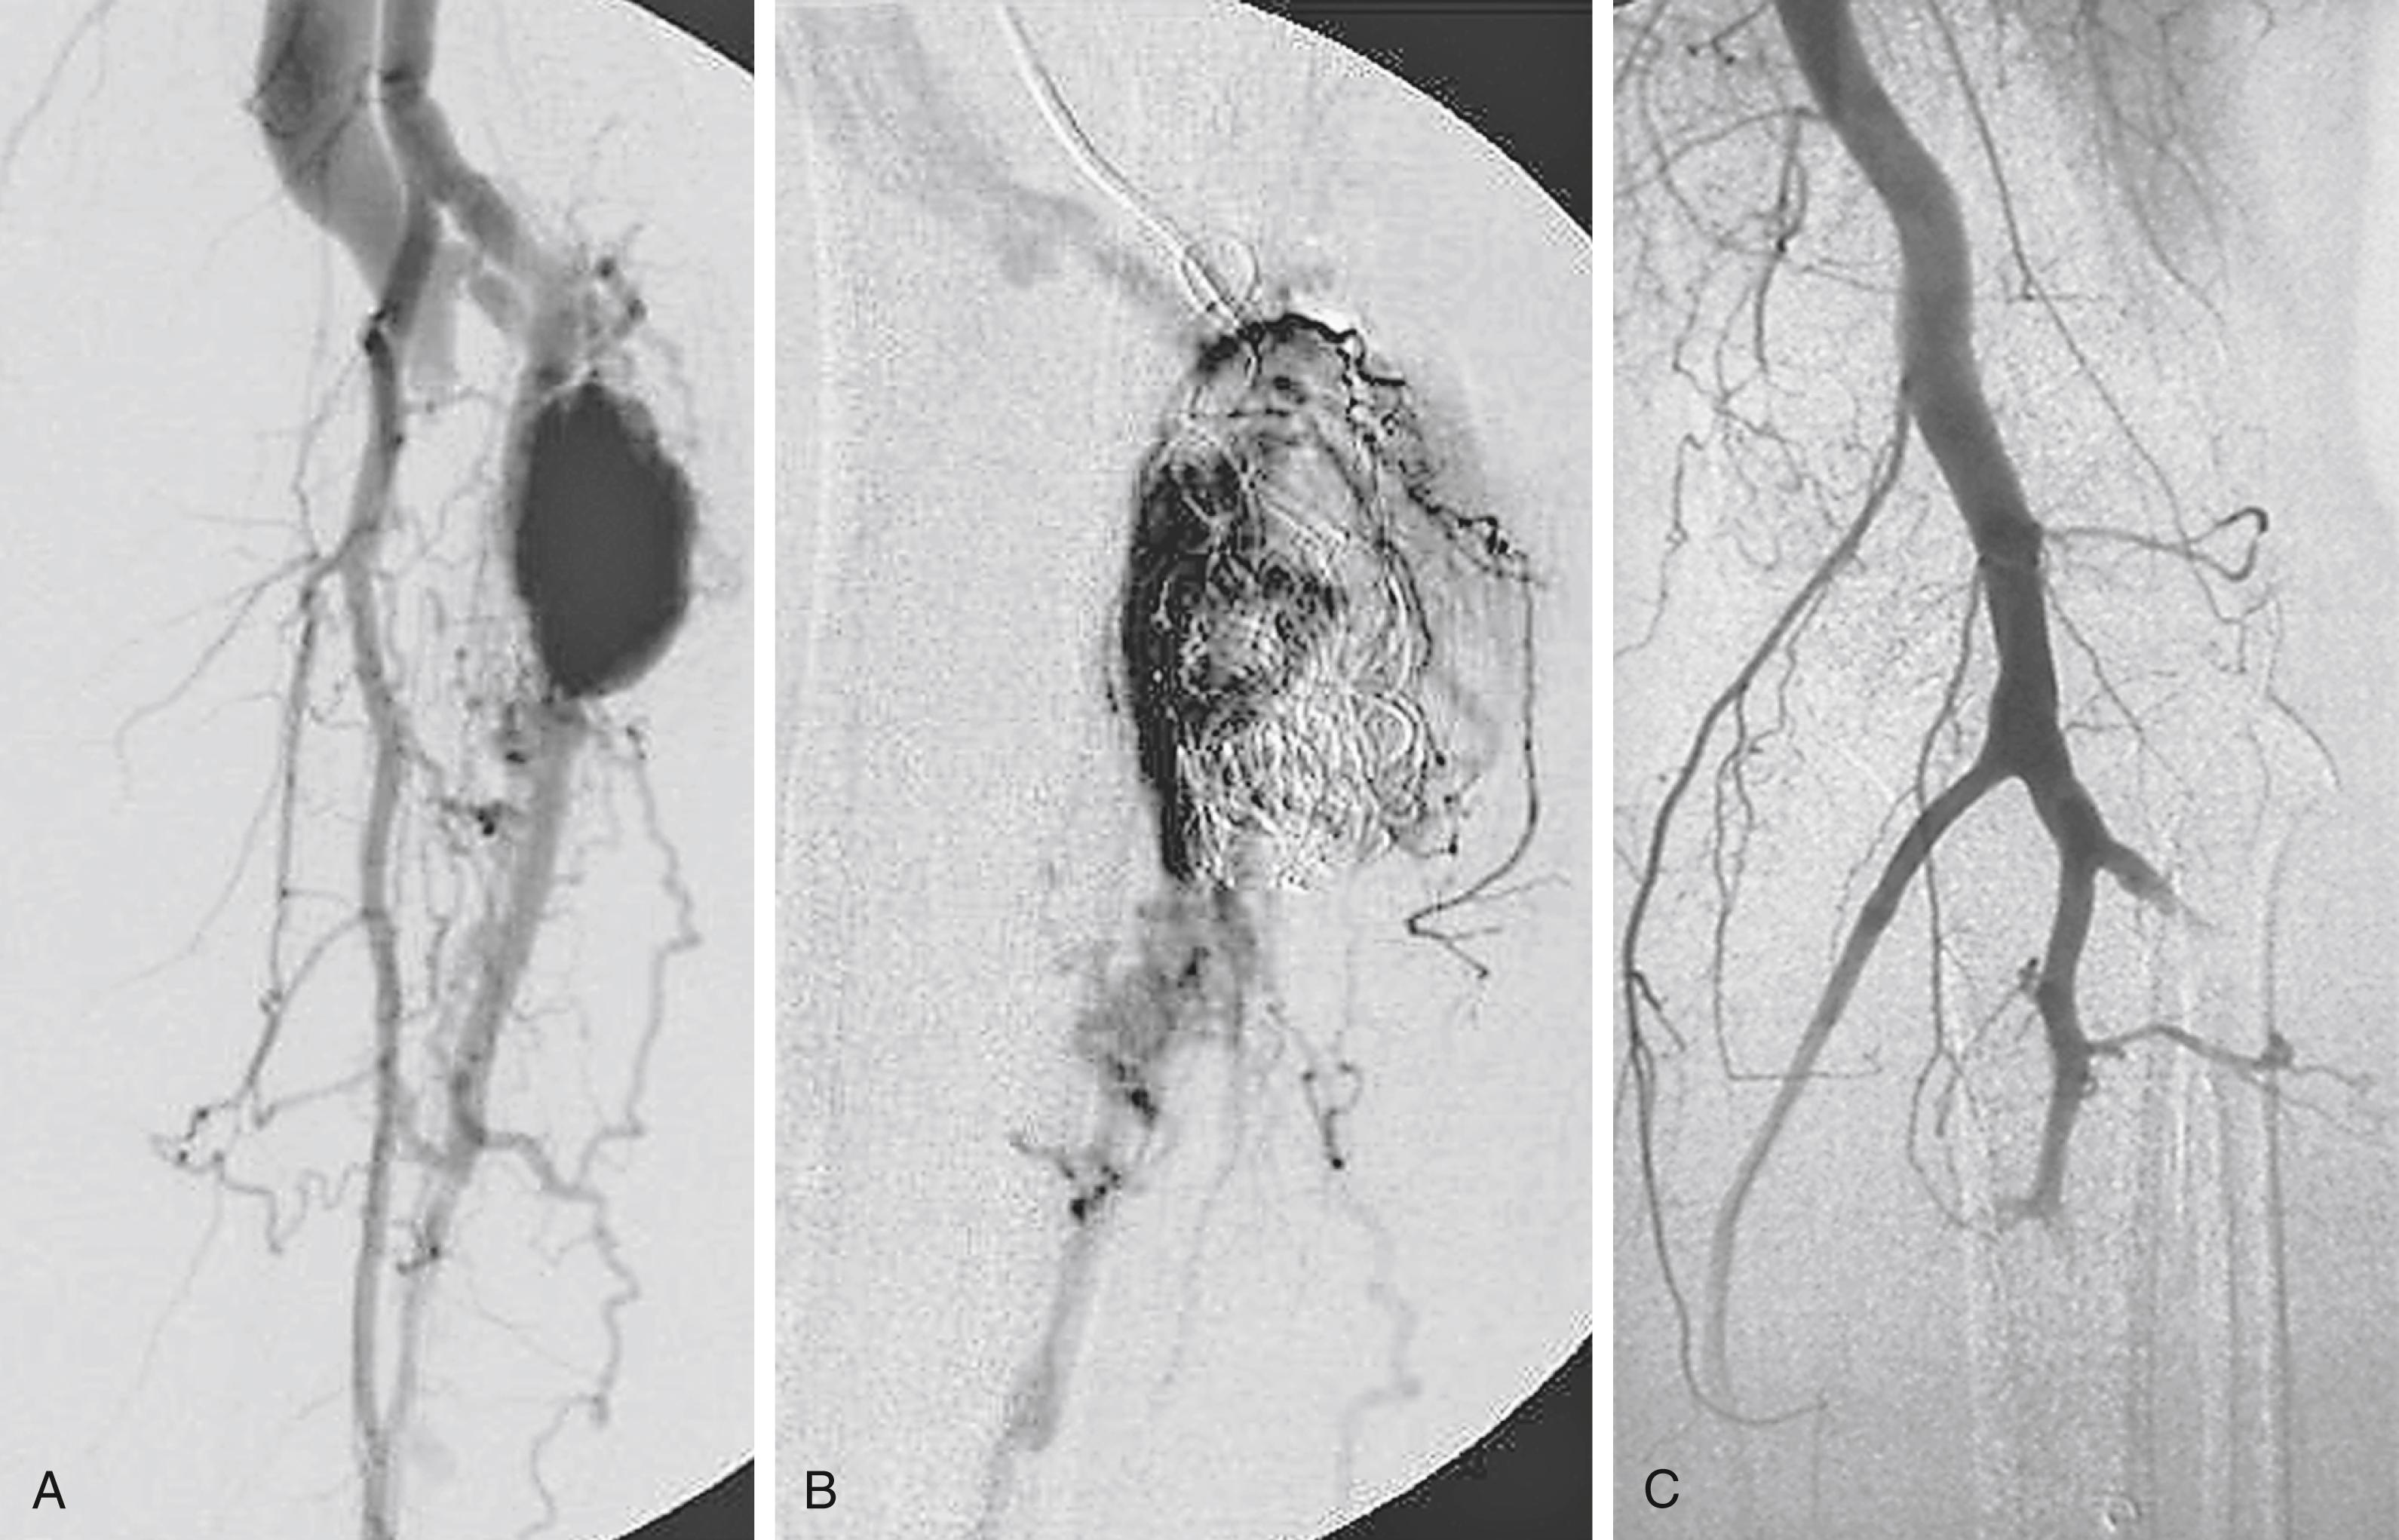 Figure 173.6, ( A ) Selective femoral angiogram demonstrating an arteriovenous fistula (AVF) between the anterior tibial artery and vein. ( B ) Coil embolization of the AVF. ( C ) Occlusion of the tibioperoneal trunk by a dislodged coil, resulting in severe limb ischemia requiring treatment with a popliteal-to-posterior tibial venous bypass graft.